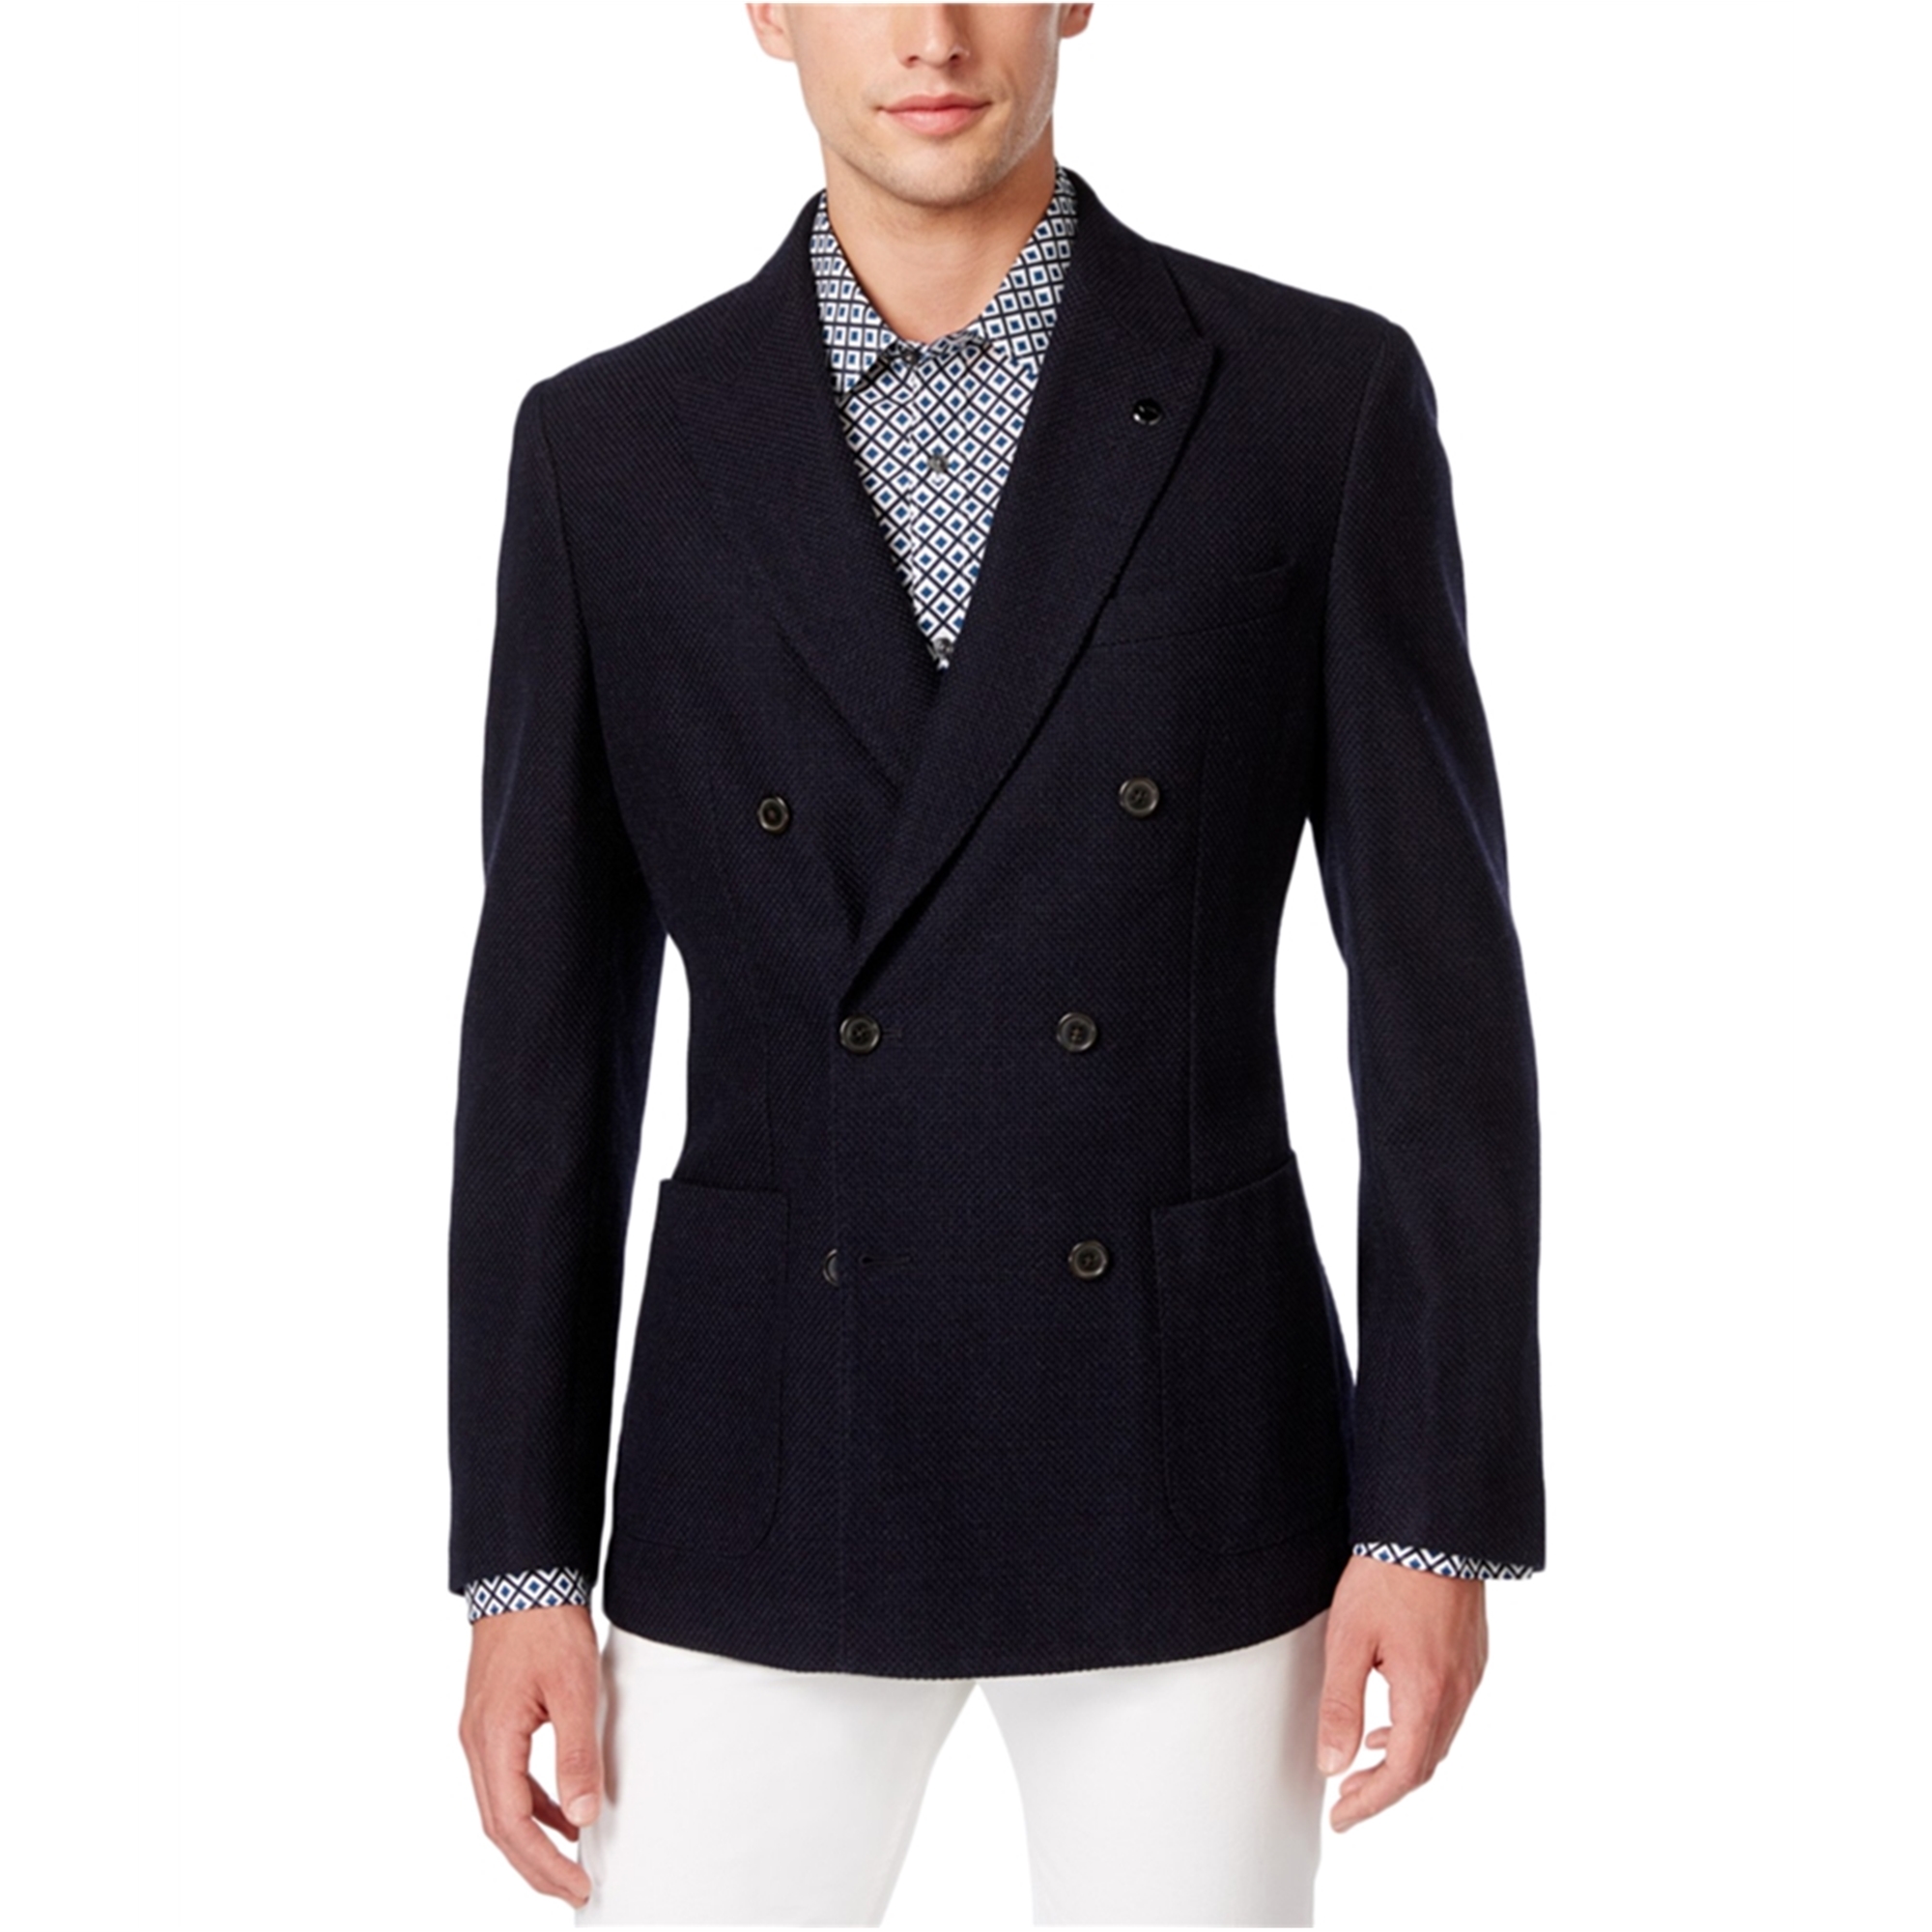 Michael Kors Mens Textured Double Breasted Blazer Jacket | Mens Apparel ...